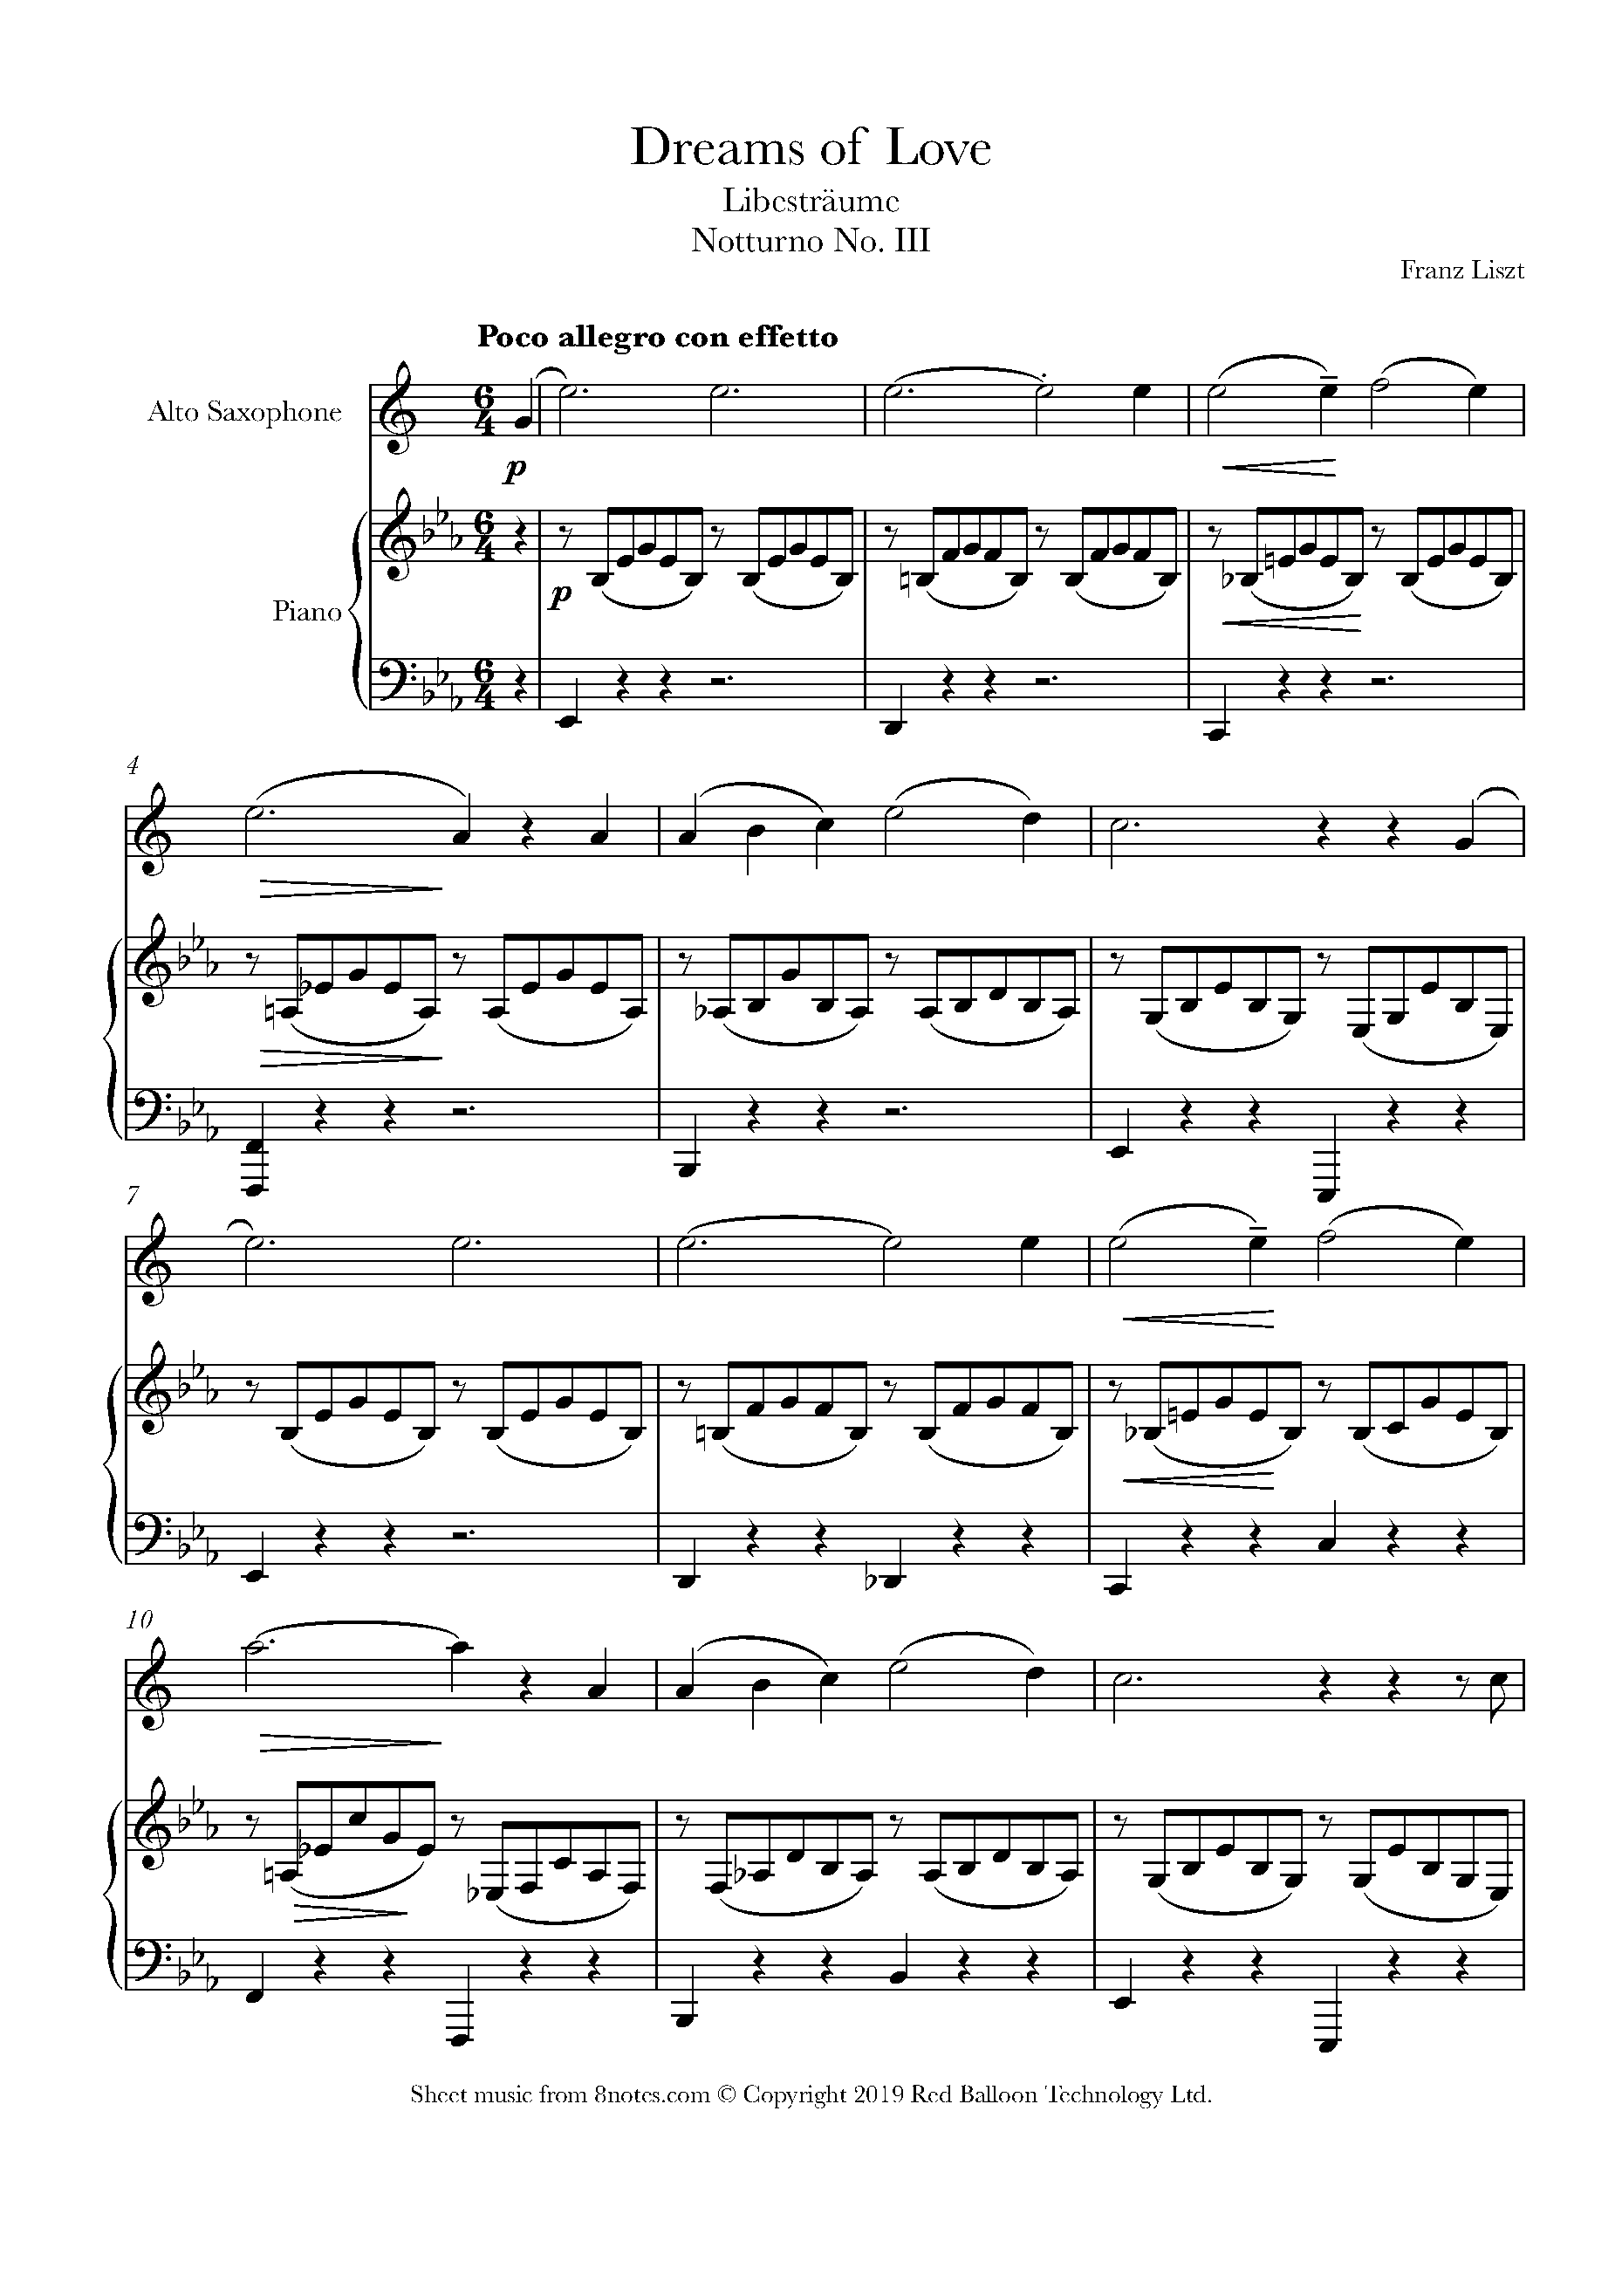 Liszt - Libestraume Notturno No. III Sheet music for Saxophone - 8notes.com